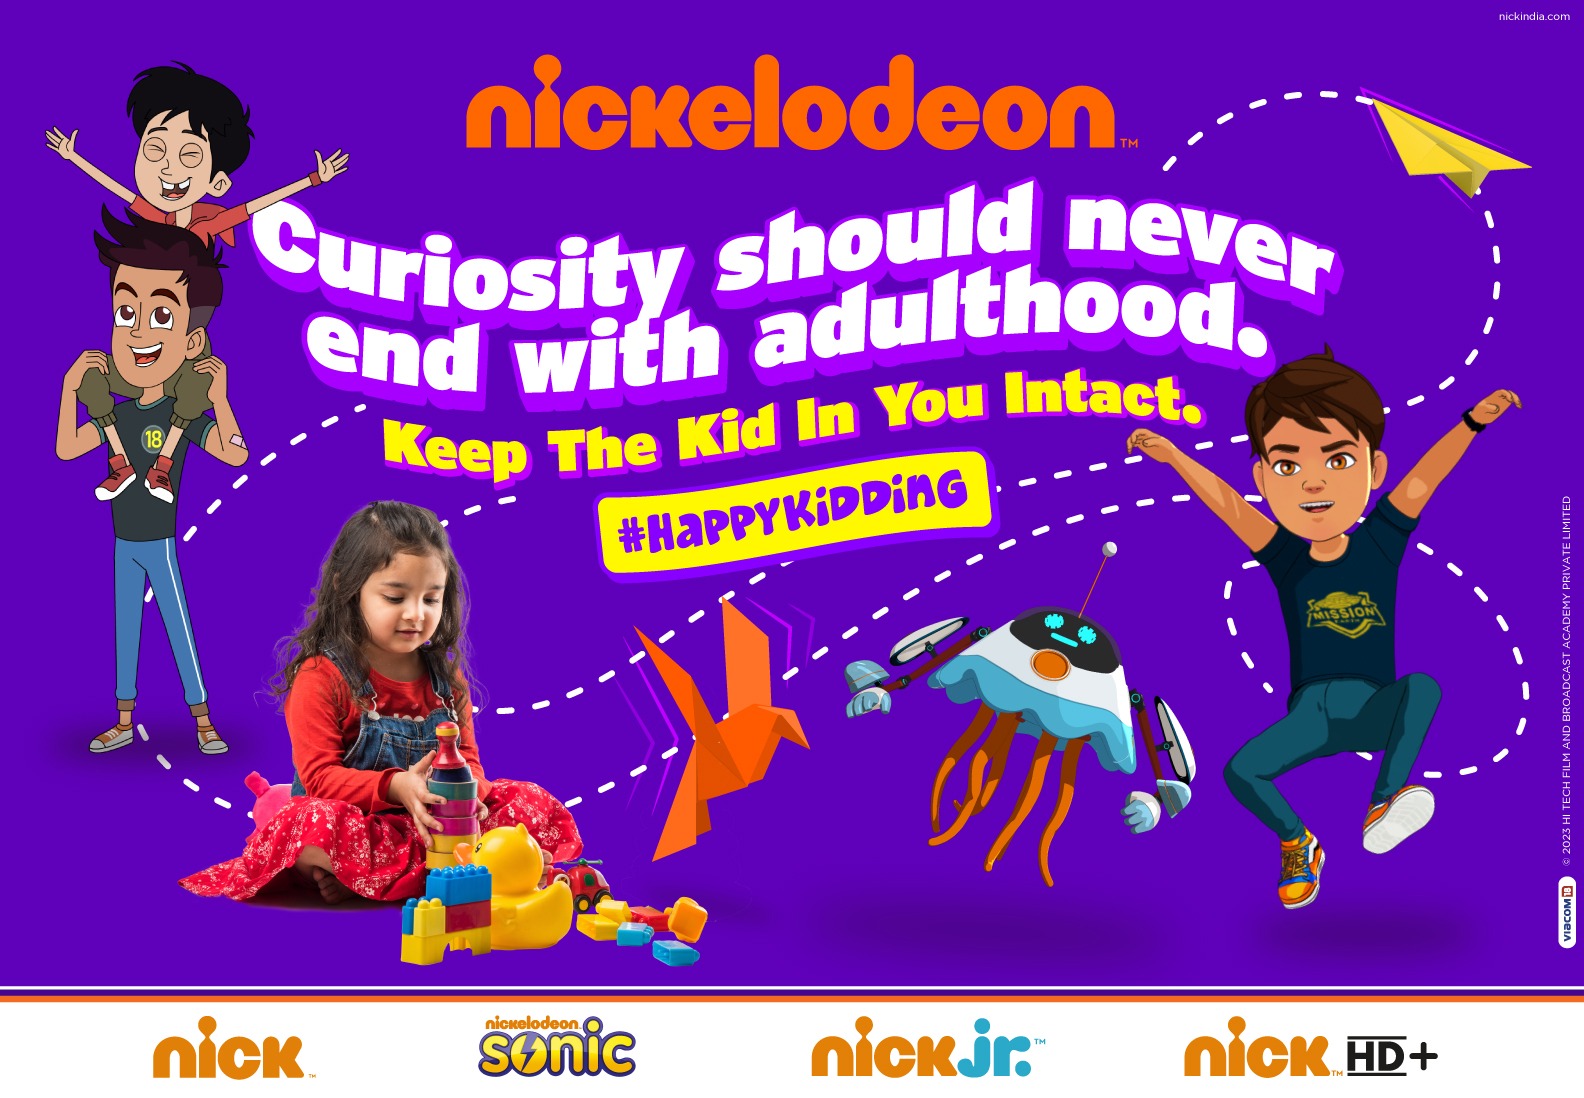 Nickelodeon celebrates the boundless curiosity within kids with #HappyKidding